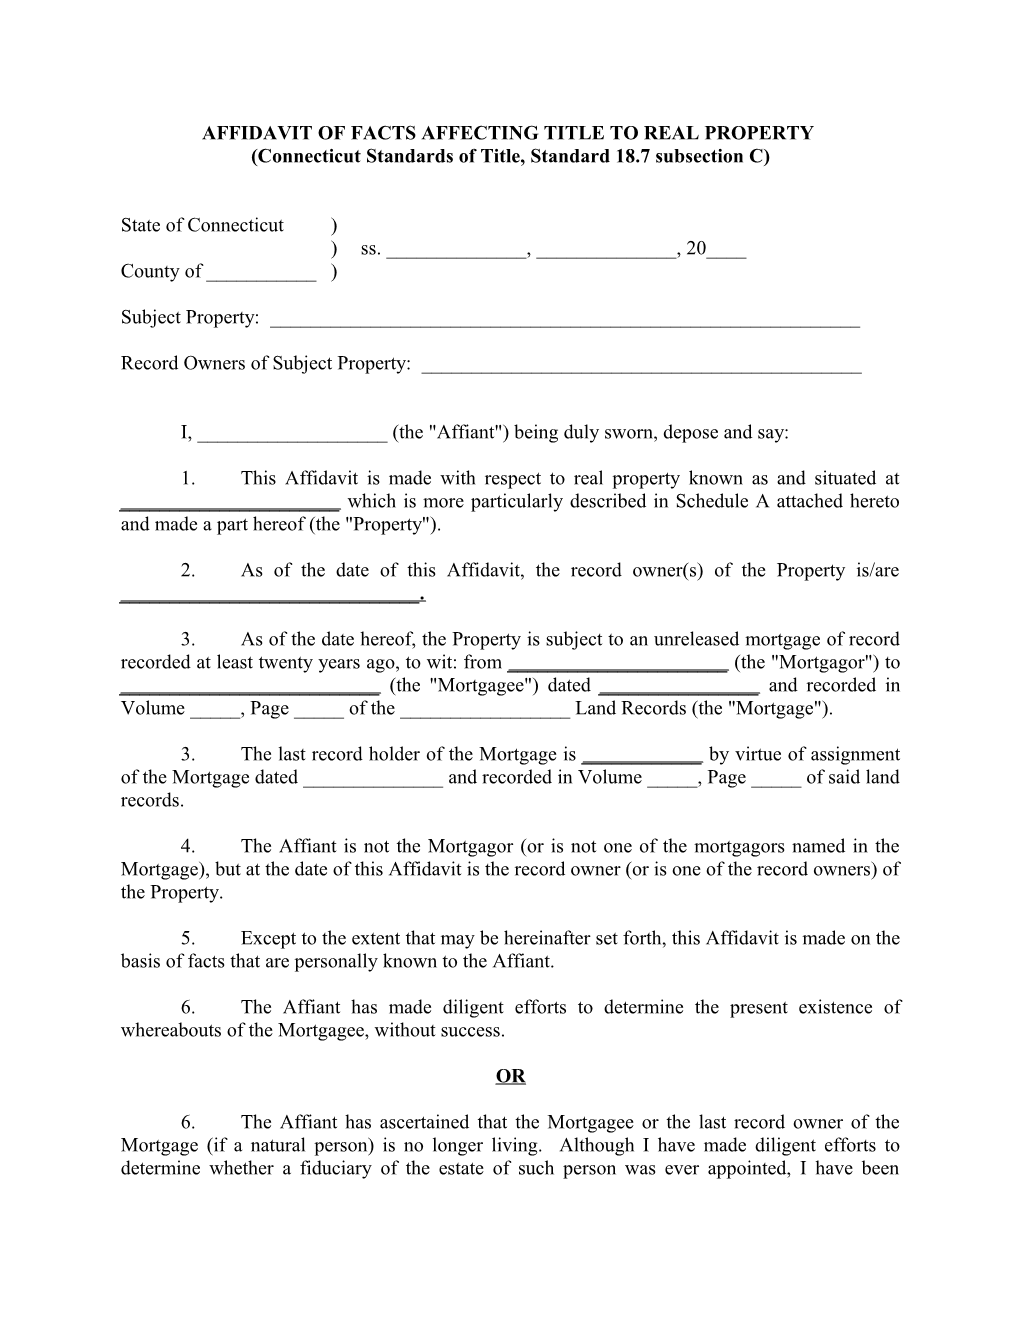 Affidavit of Facts Affecting Title to Real Property